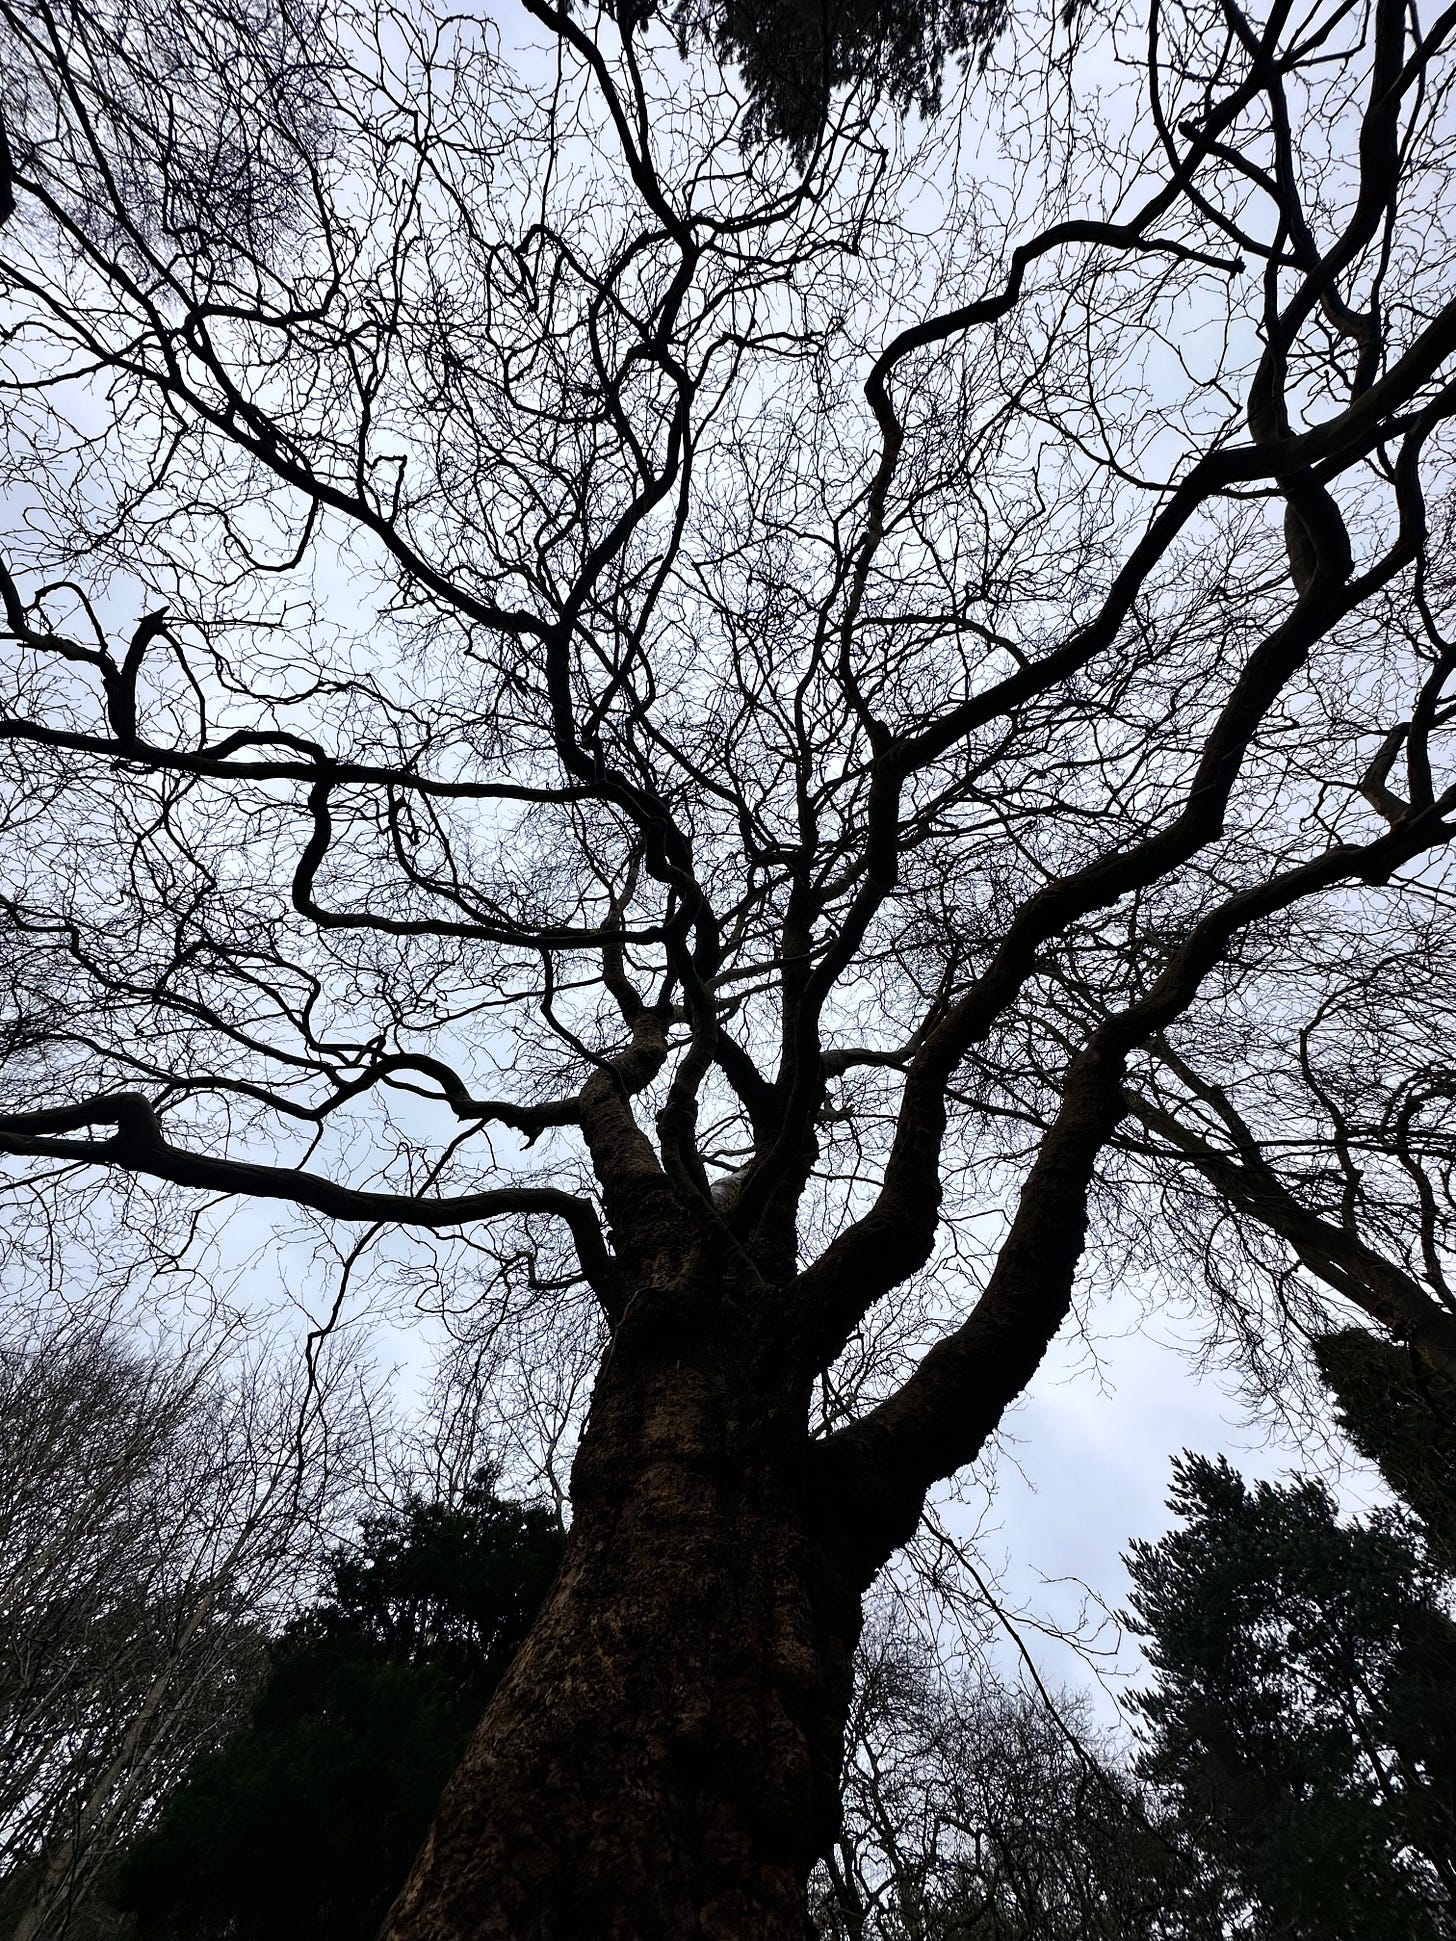 a rather eerie looking photo of a leafless tree with thousands of tiny, spindling branches, taken from below